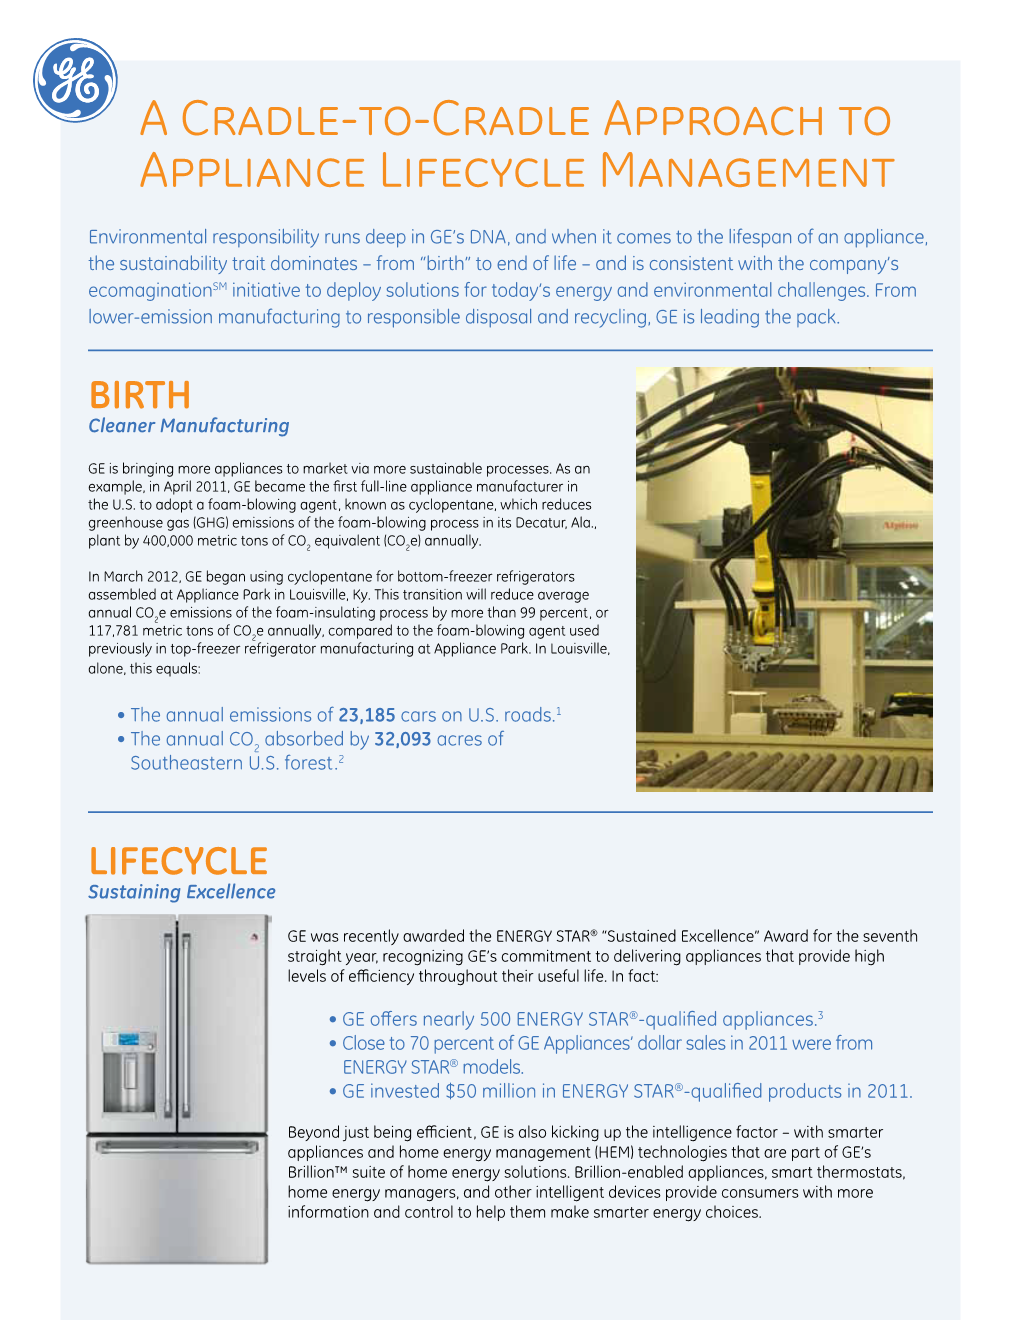 A Cradle-To-Cradle Approach to Appliance Lifecycle Management